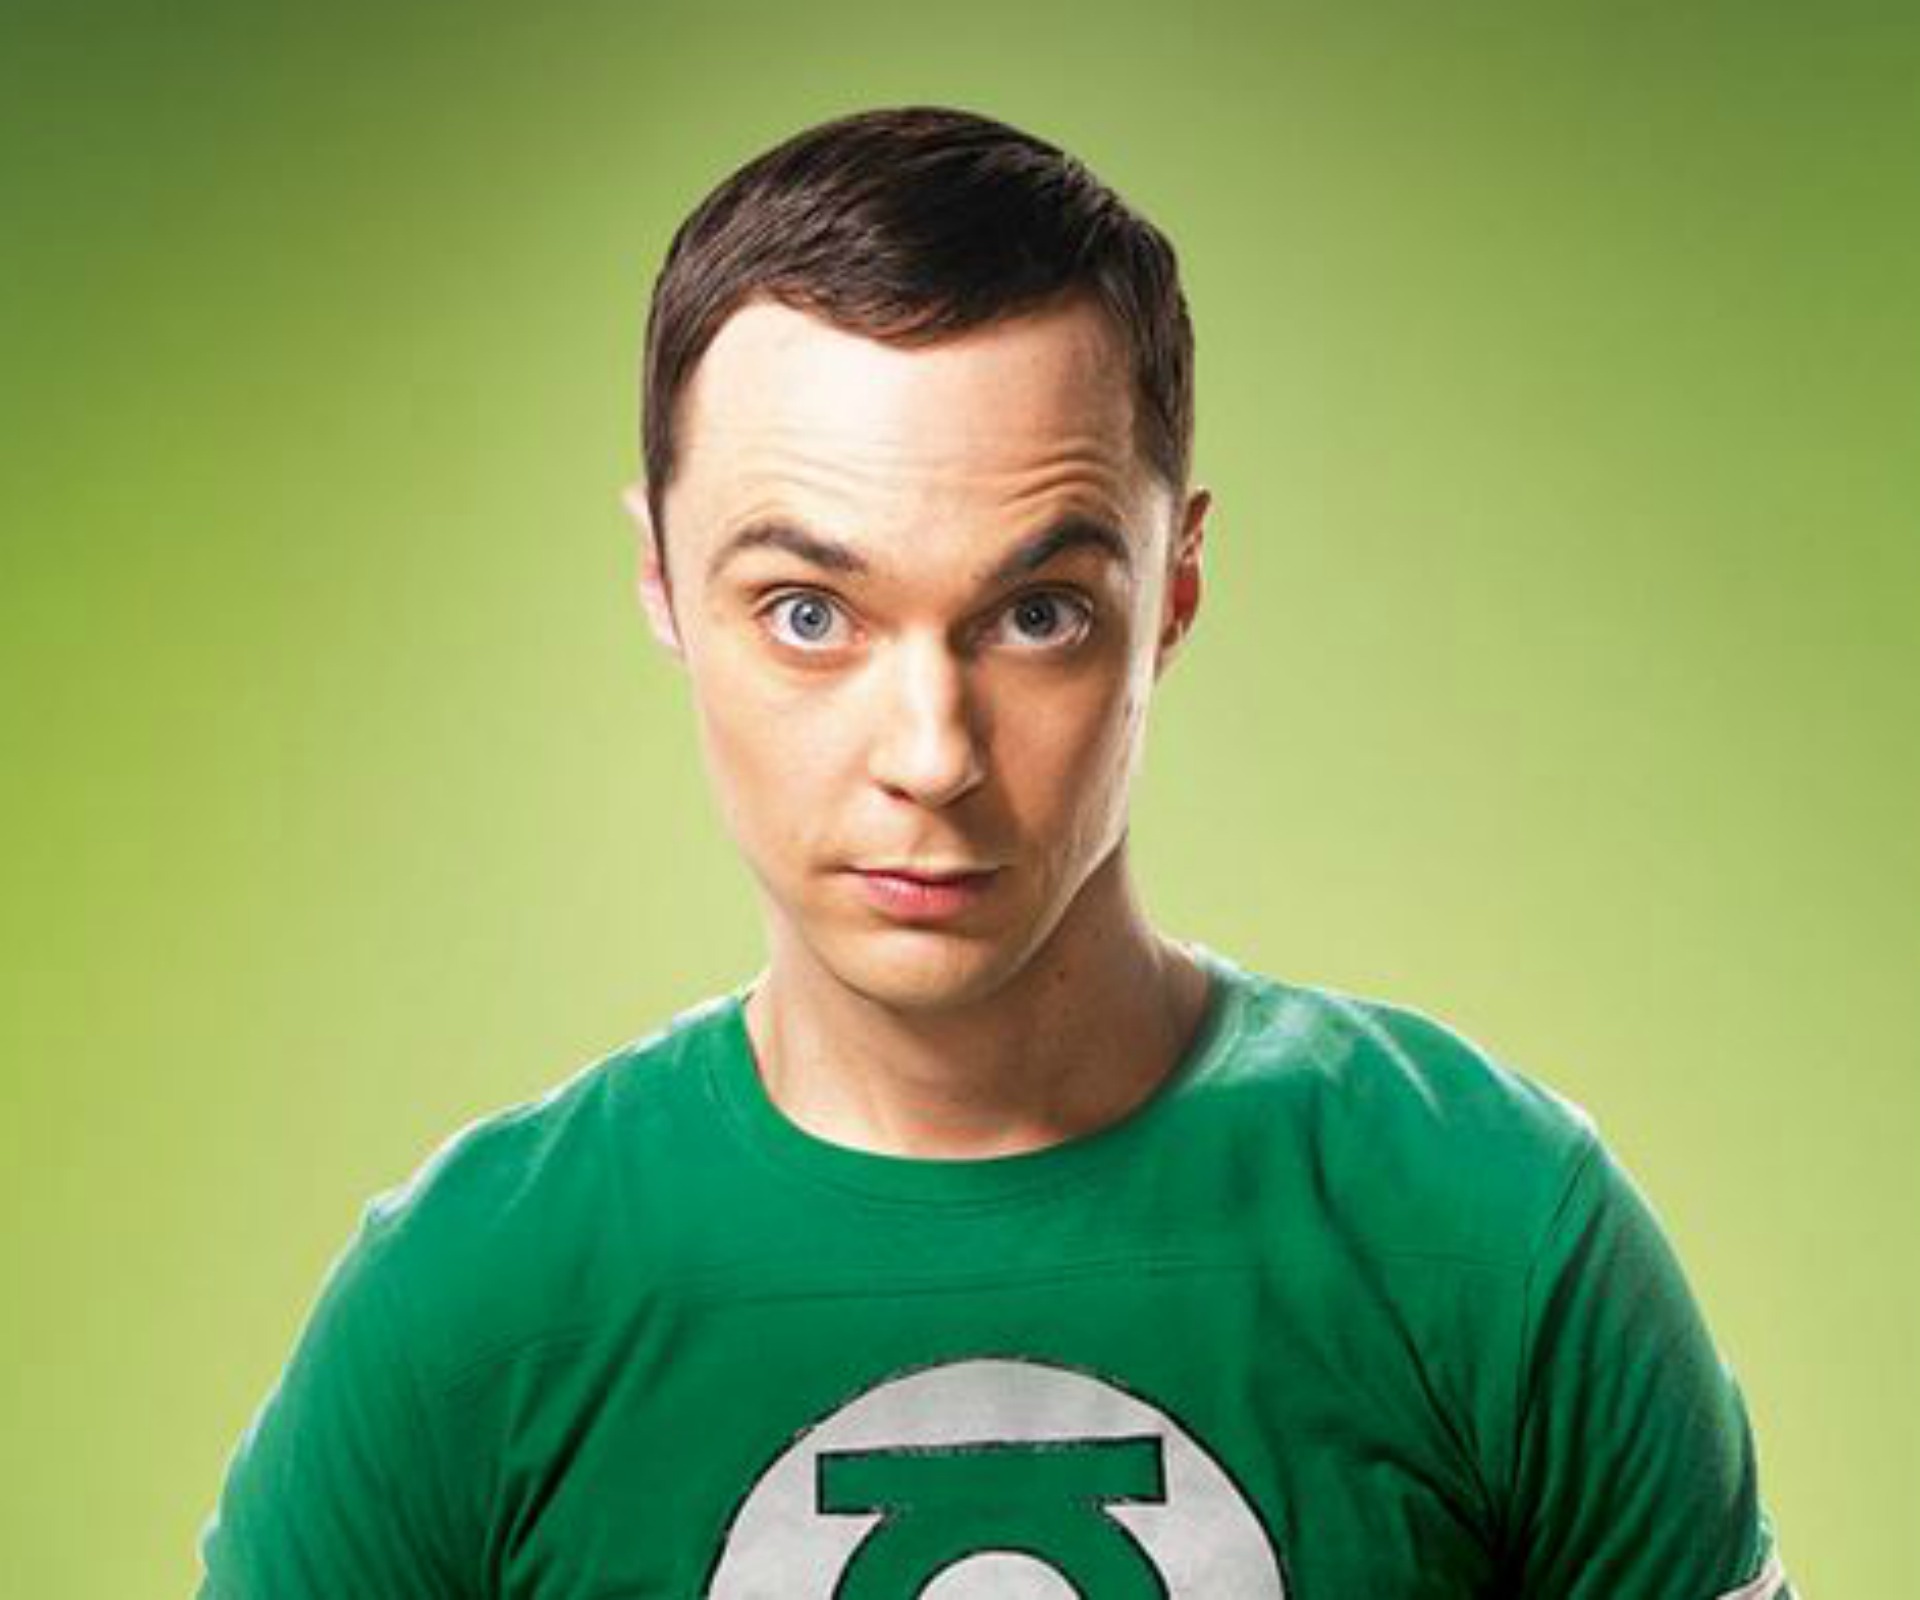 Big Bang Theory actor was almost a weatherman